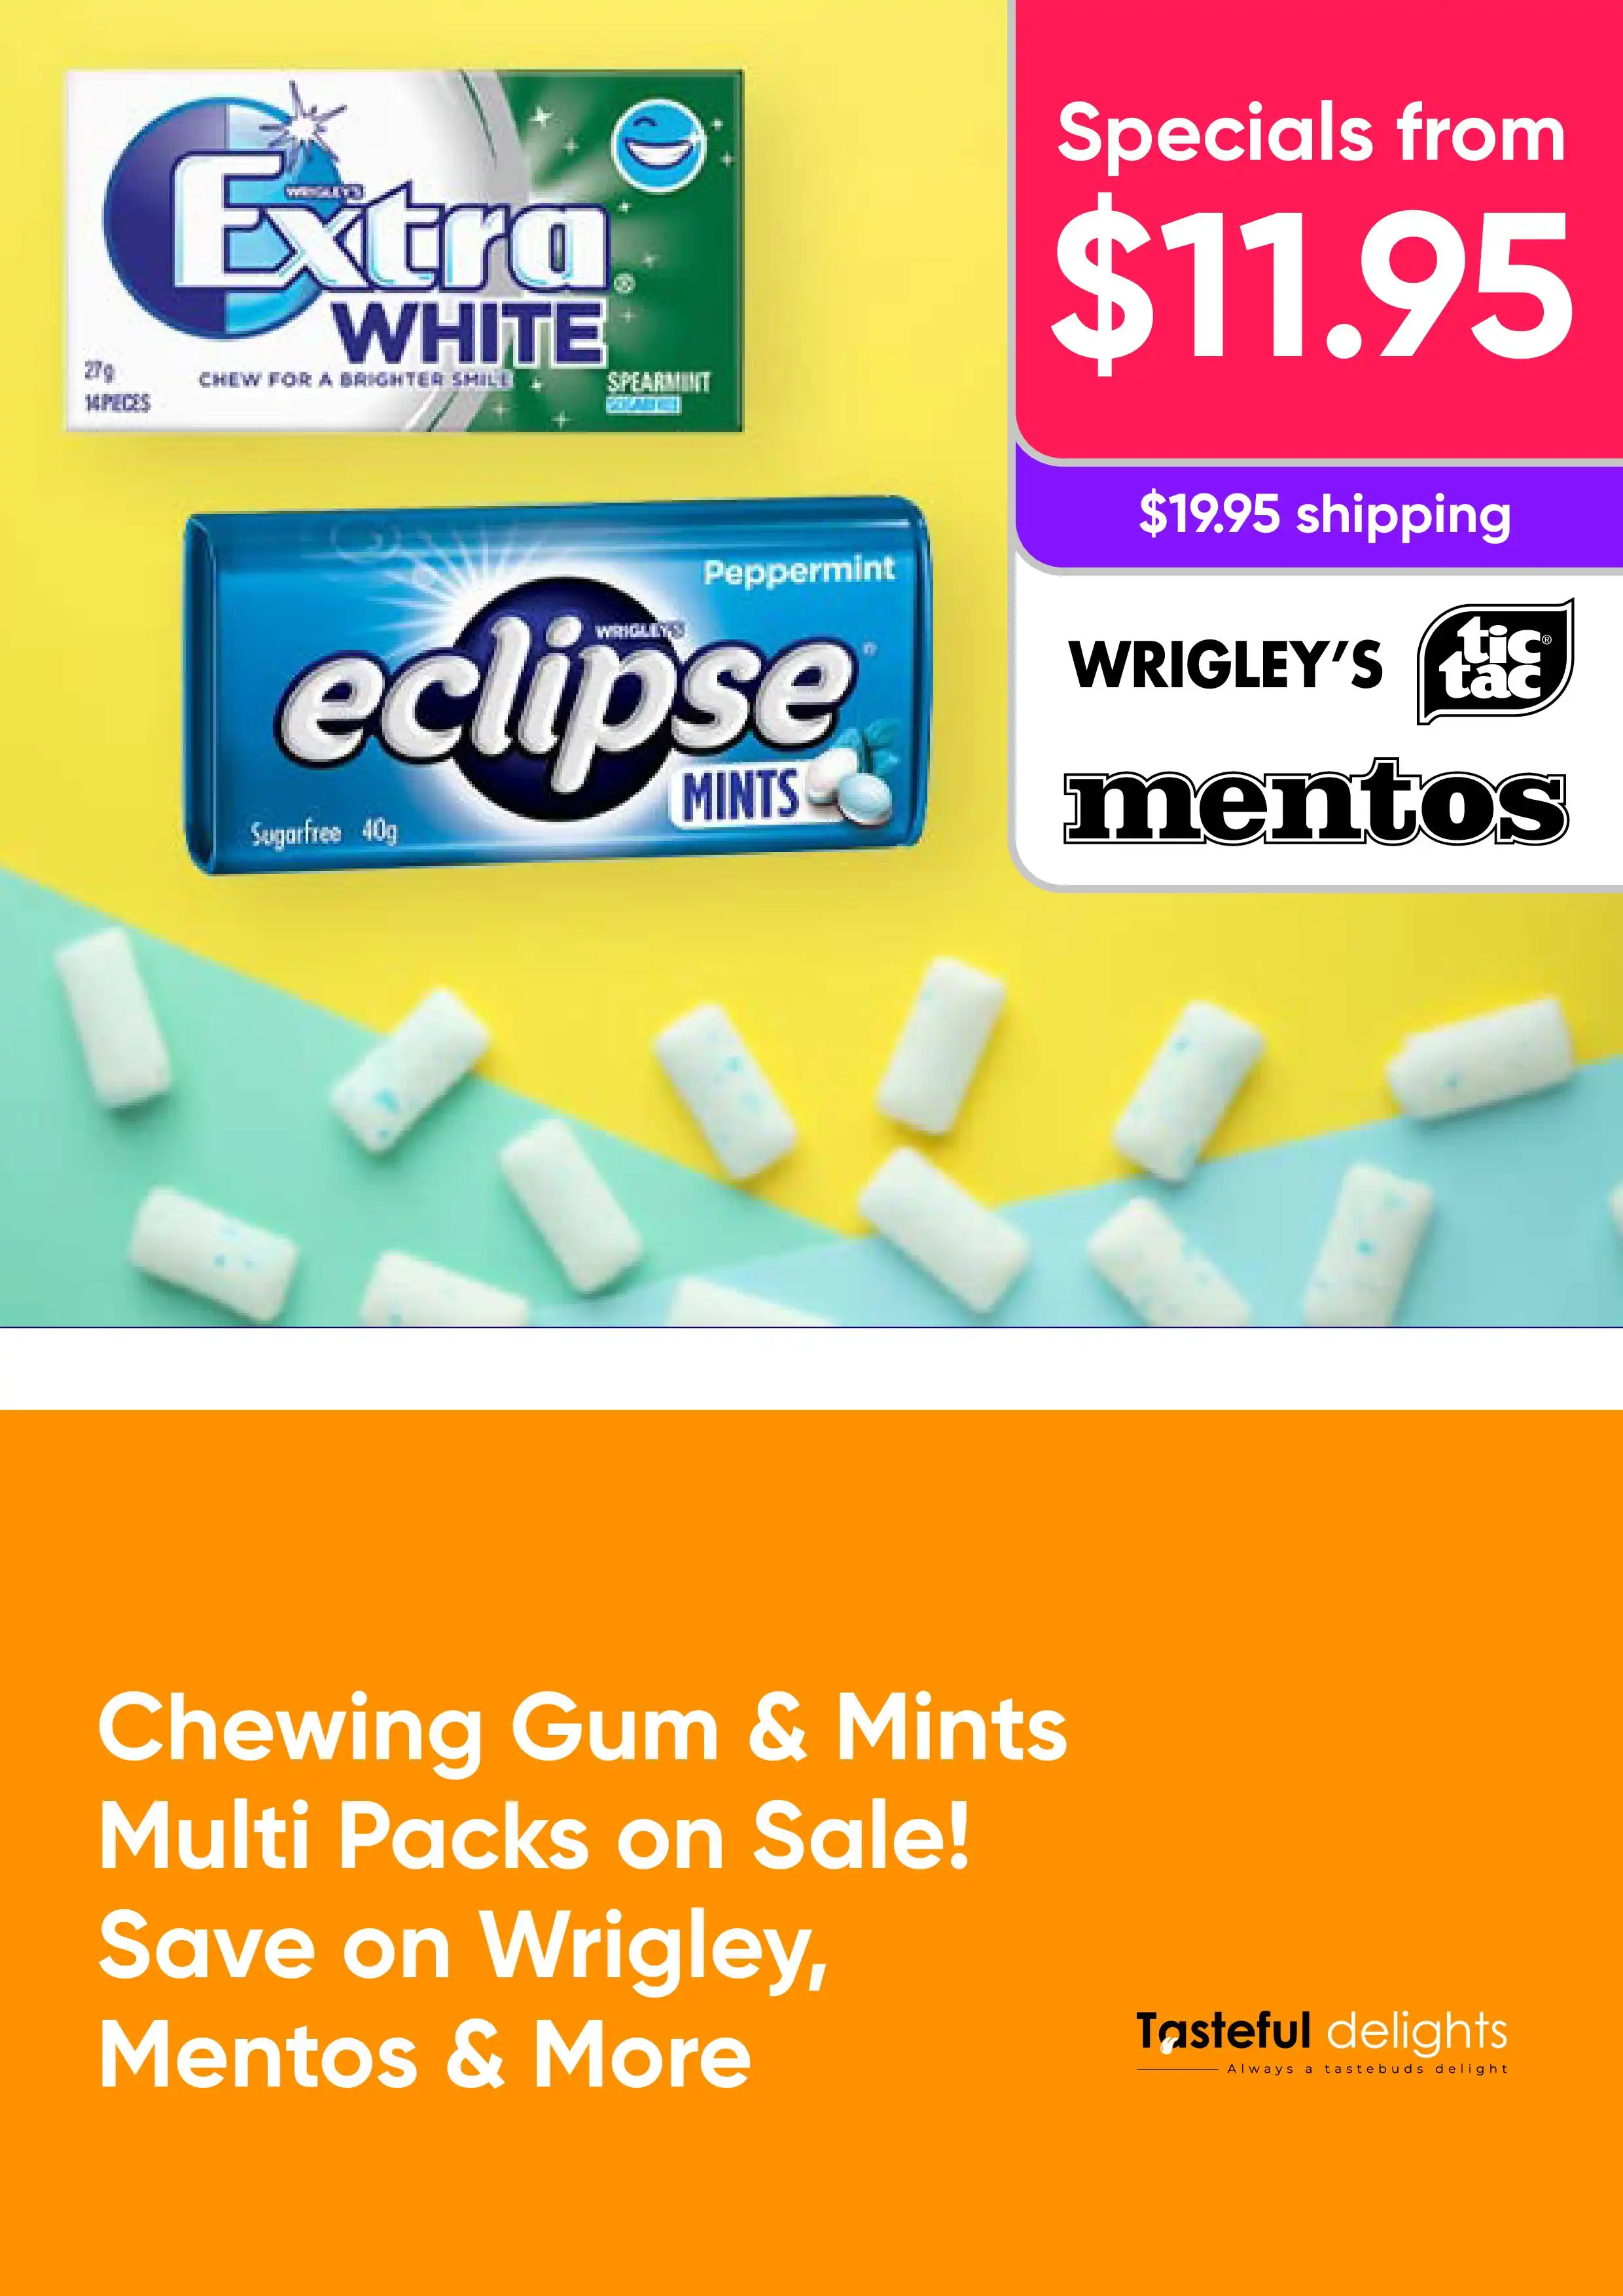 Chewing Gum & Mints in Multi packs Sale! Save on Wrigley, Mentos & More